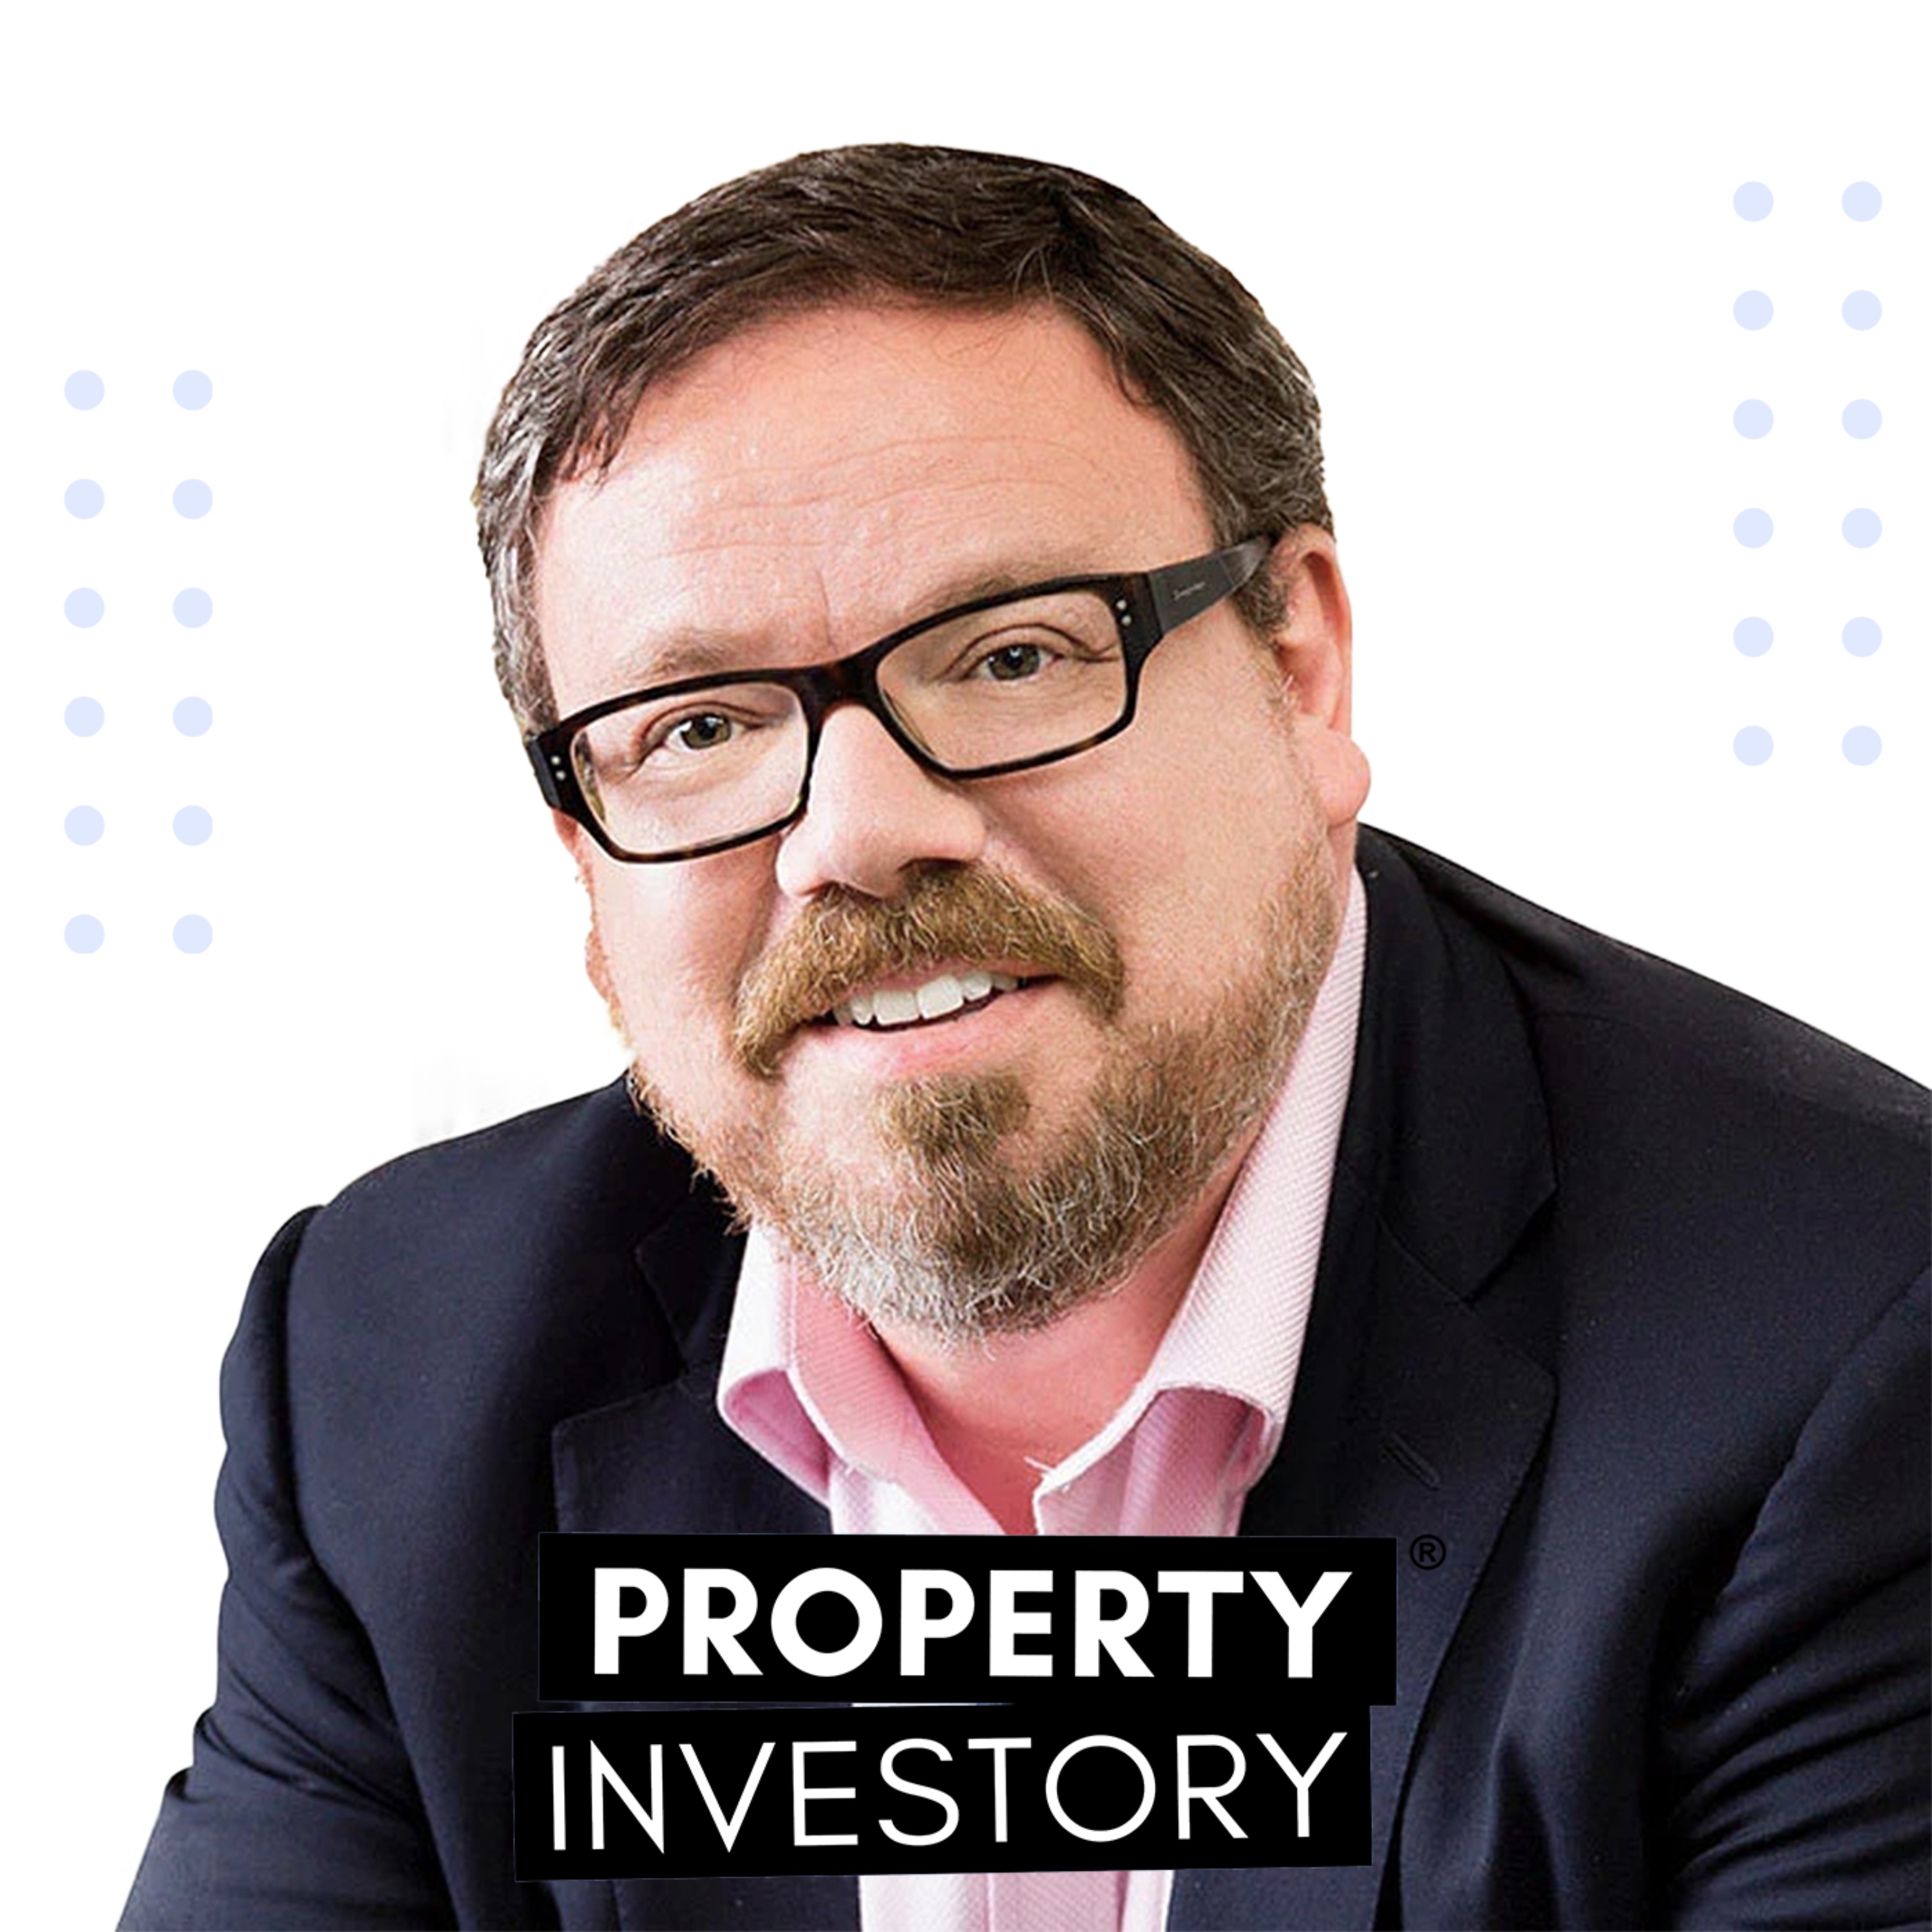 Evan Thornley Reveals the Principle of the ’1% In 100’ in Property